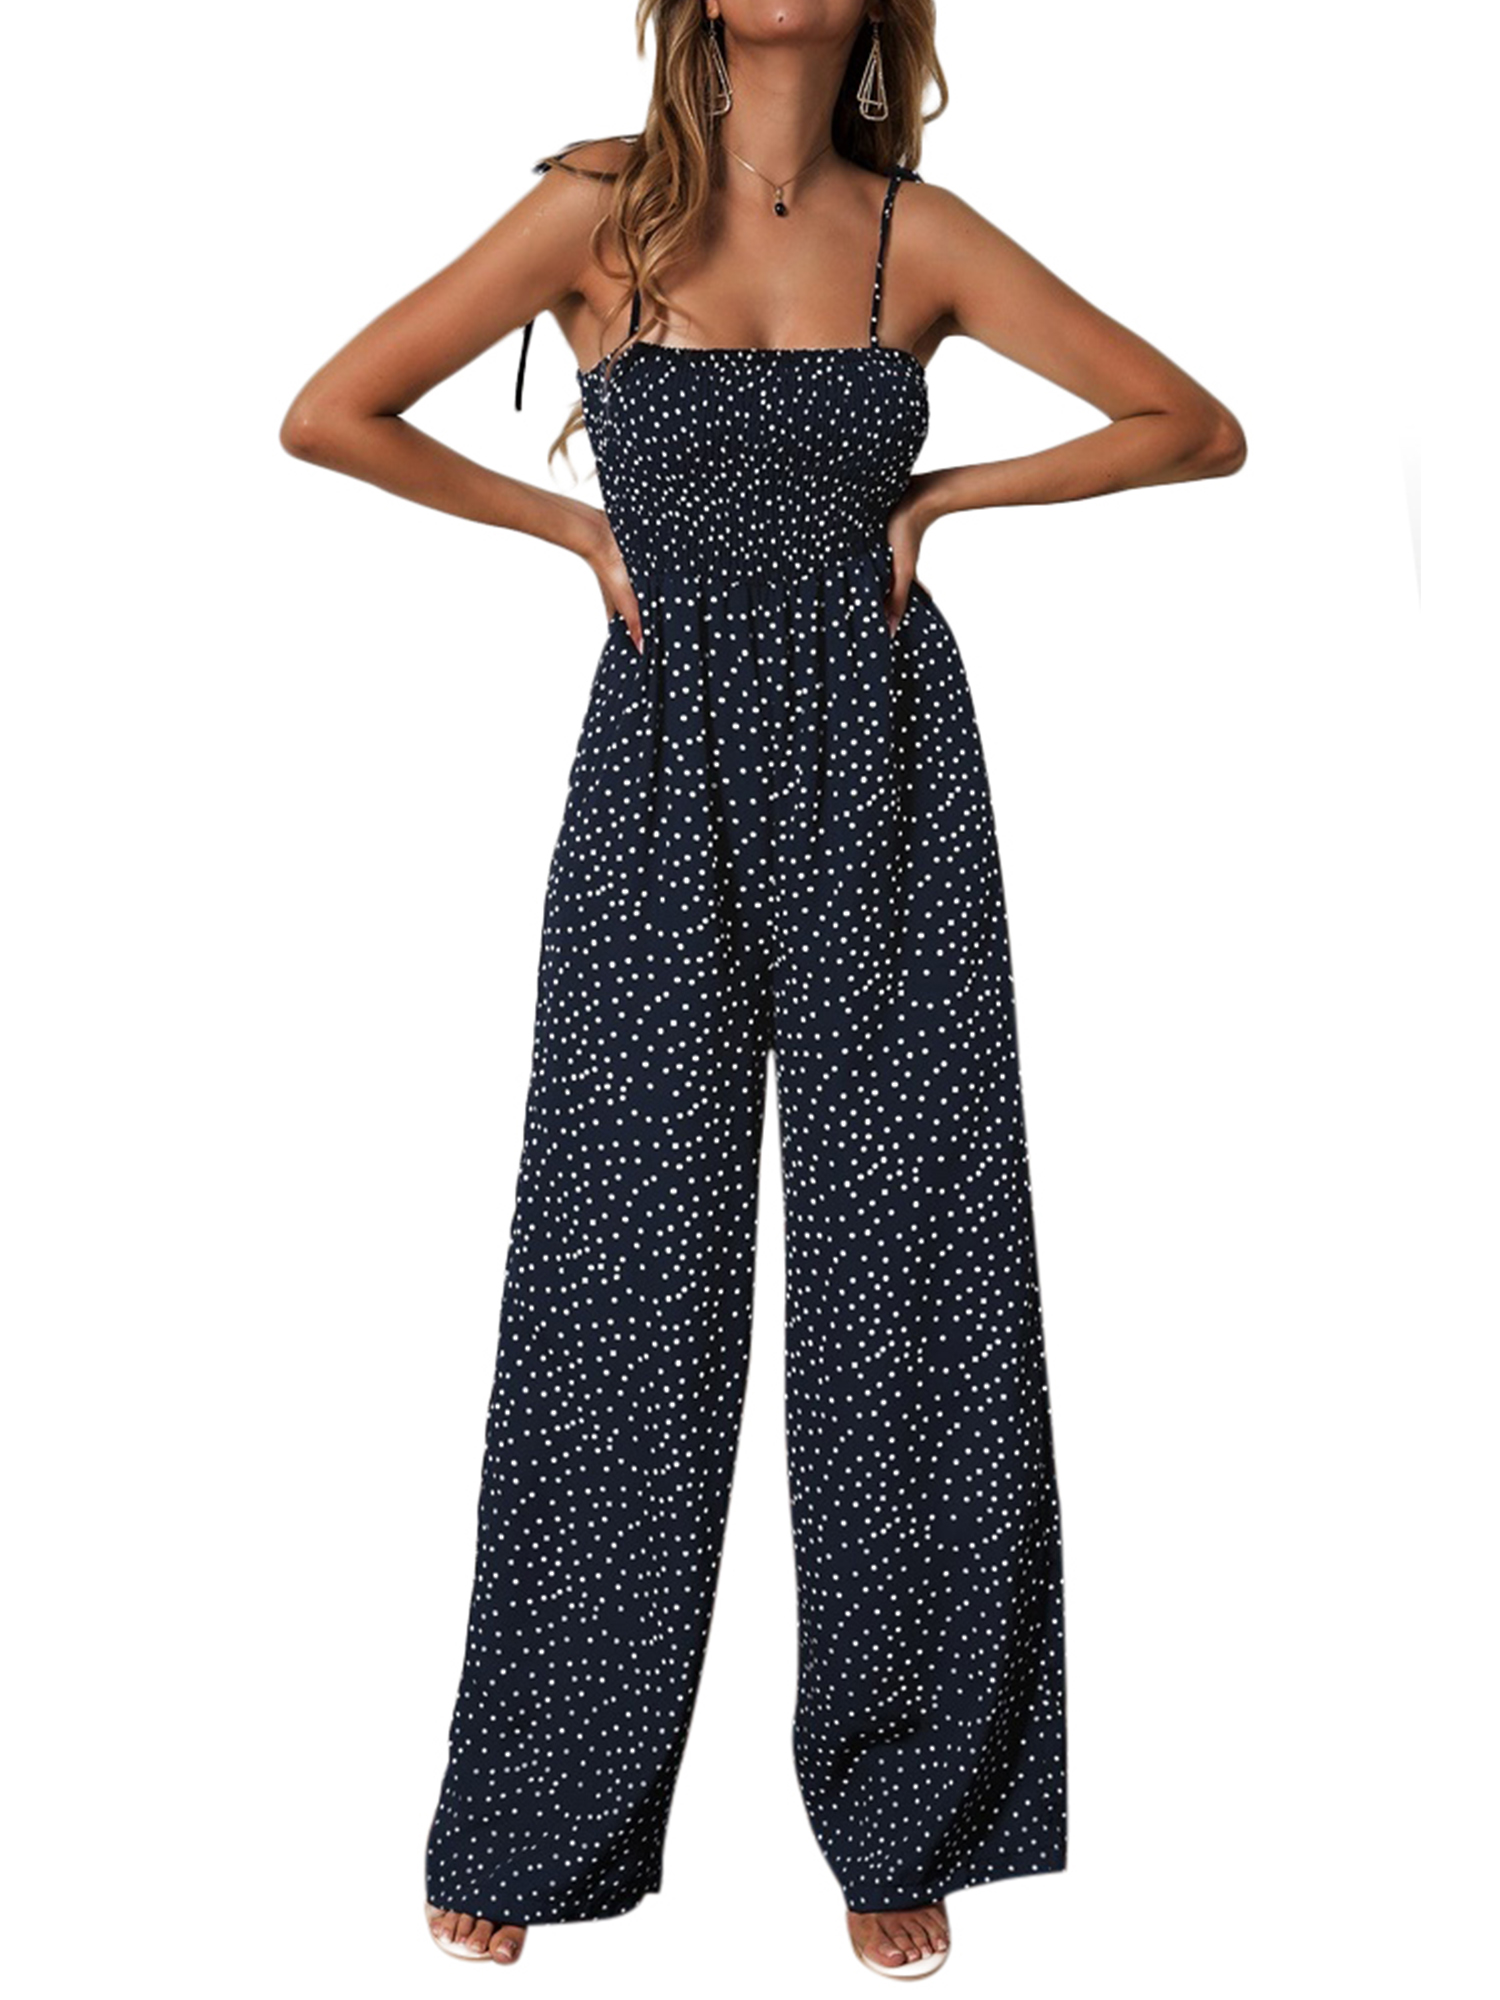 Strapless Jumpsuit For Women Polka Dot Wide Leg Evening Party Playsuit Ladies Casual Loose Rompers Long Trousers - image 3 of 8